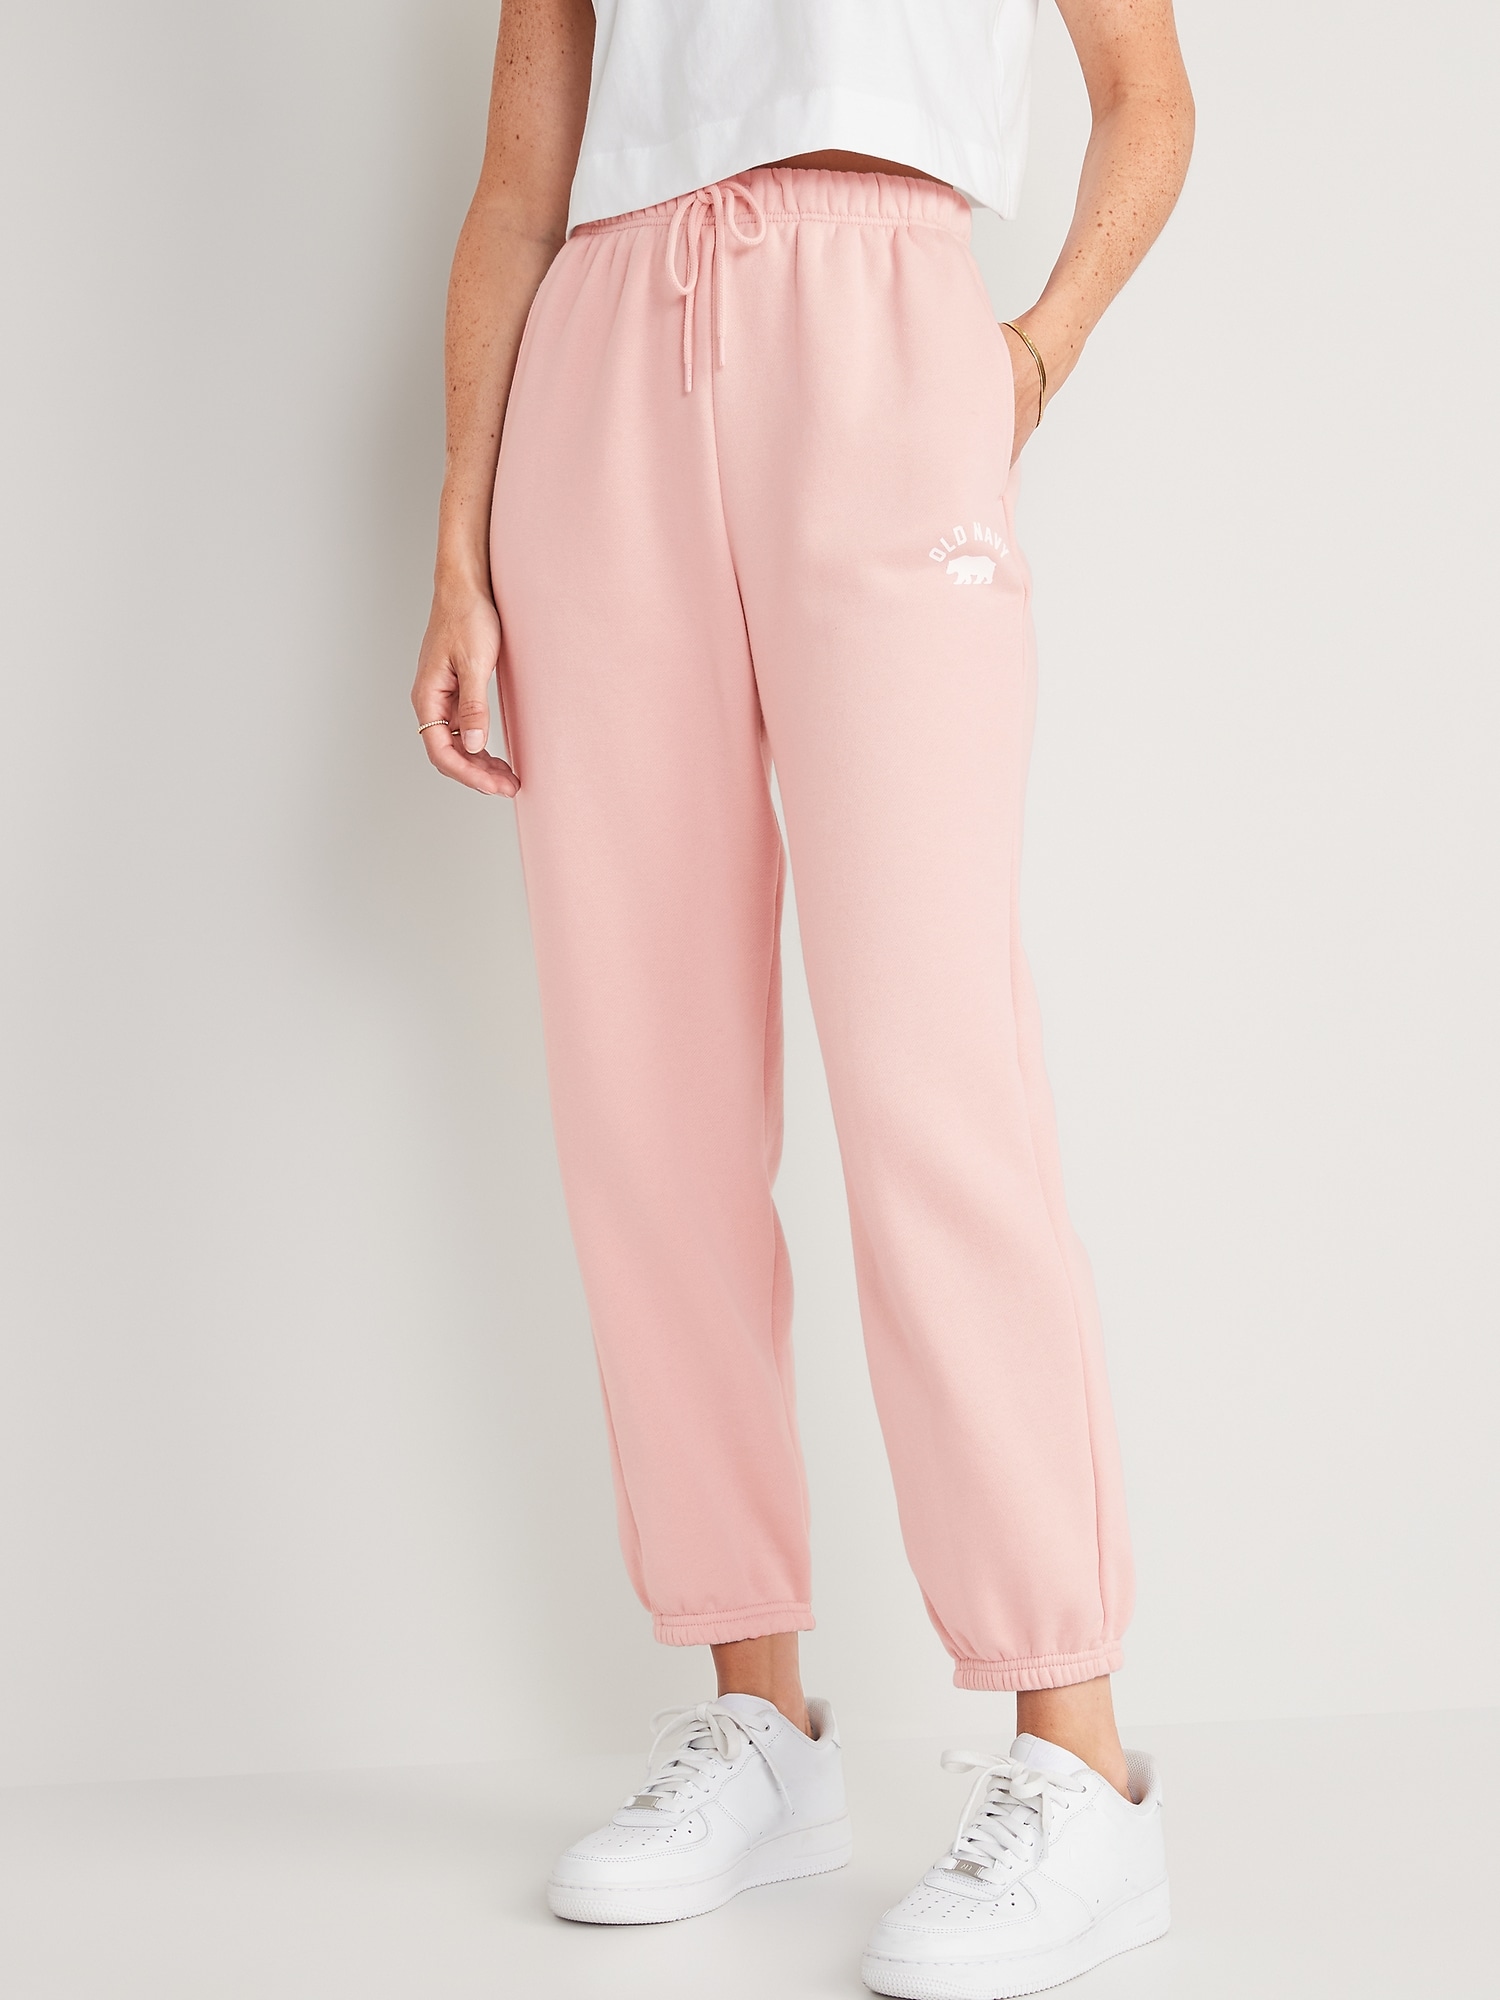 Affordable Wholesale hot pink sweatpants For Trendsetting Looks